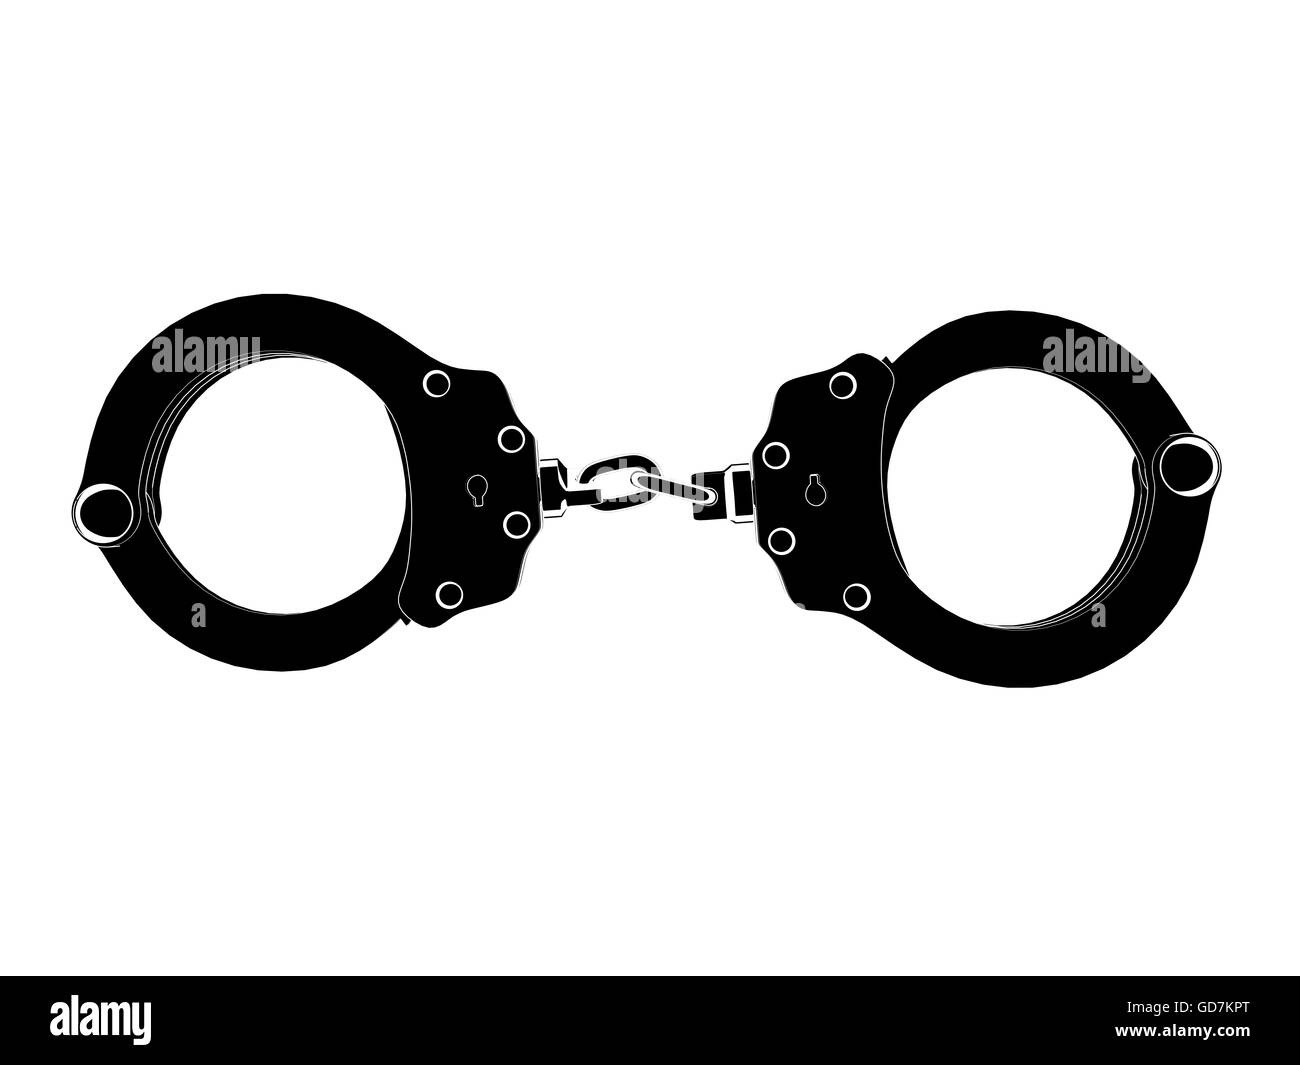 Black and white iconic handcuffs illustration isolated on a white background. 3D Illustration. Stock Photo